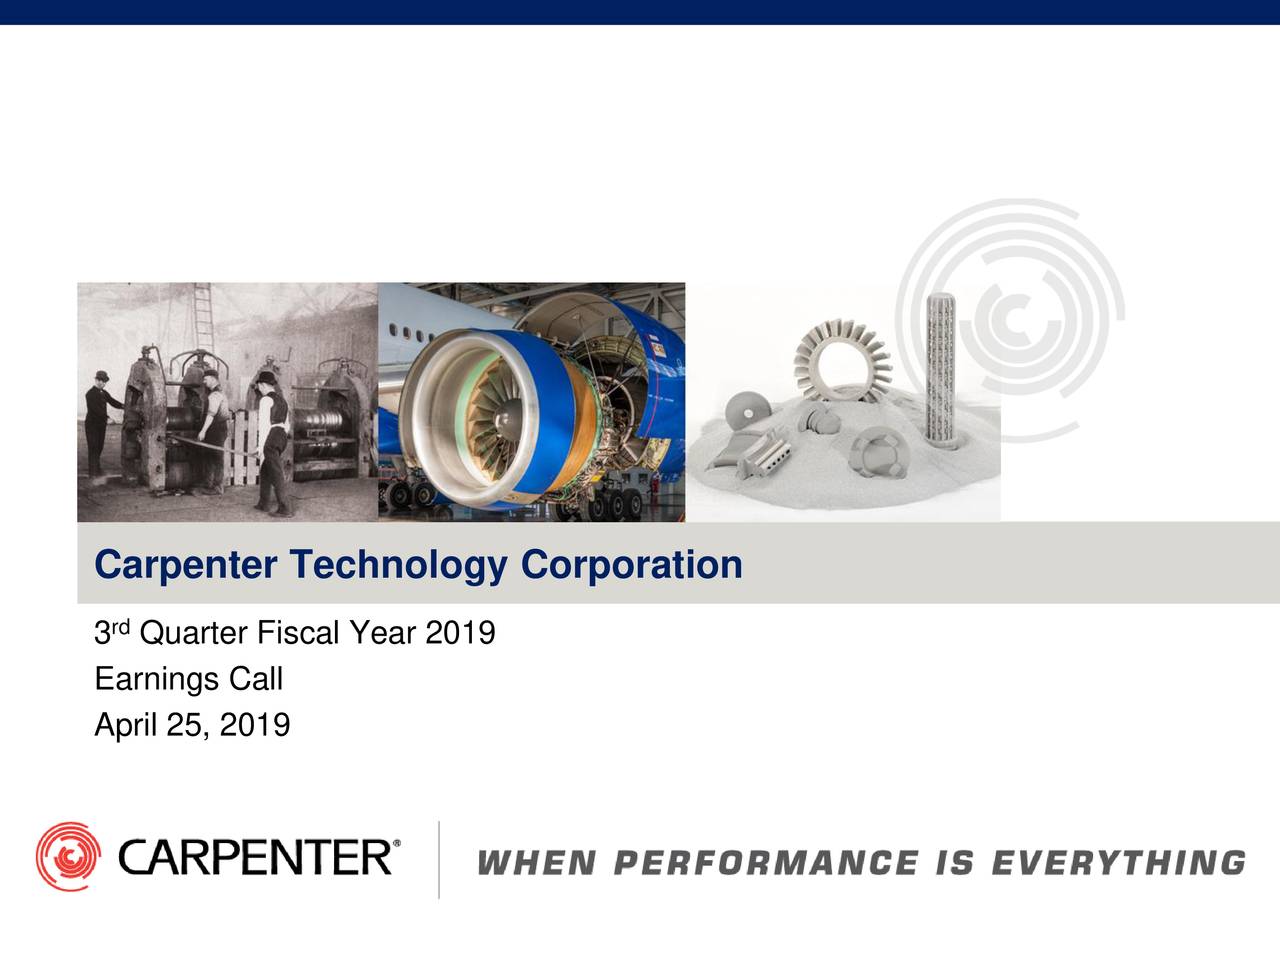 carpenter-technology-corporation-2019-q3-results-earnings-call-slides-nyse-crs-seeking-alpha